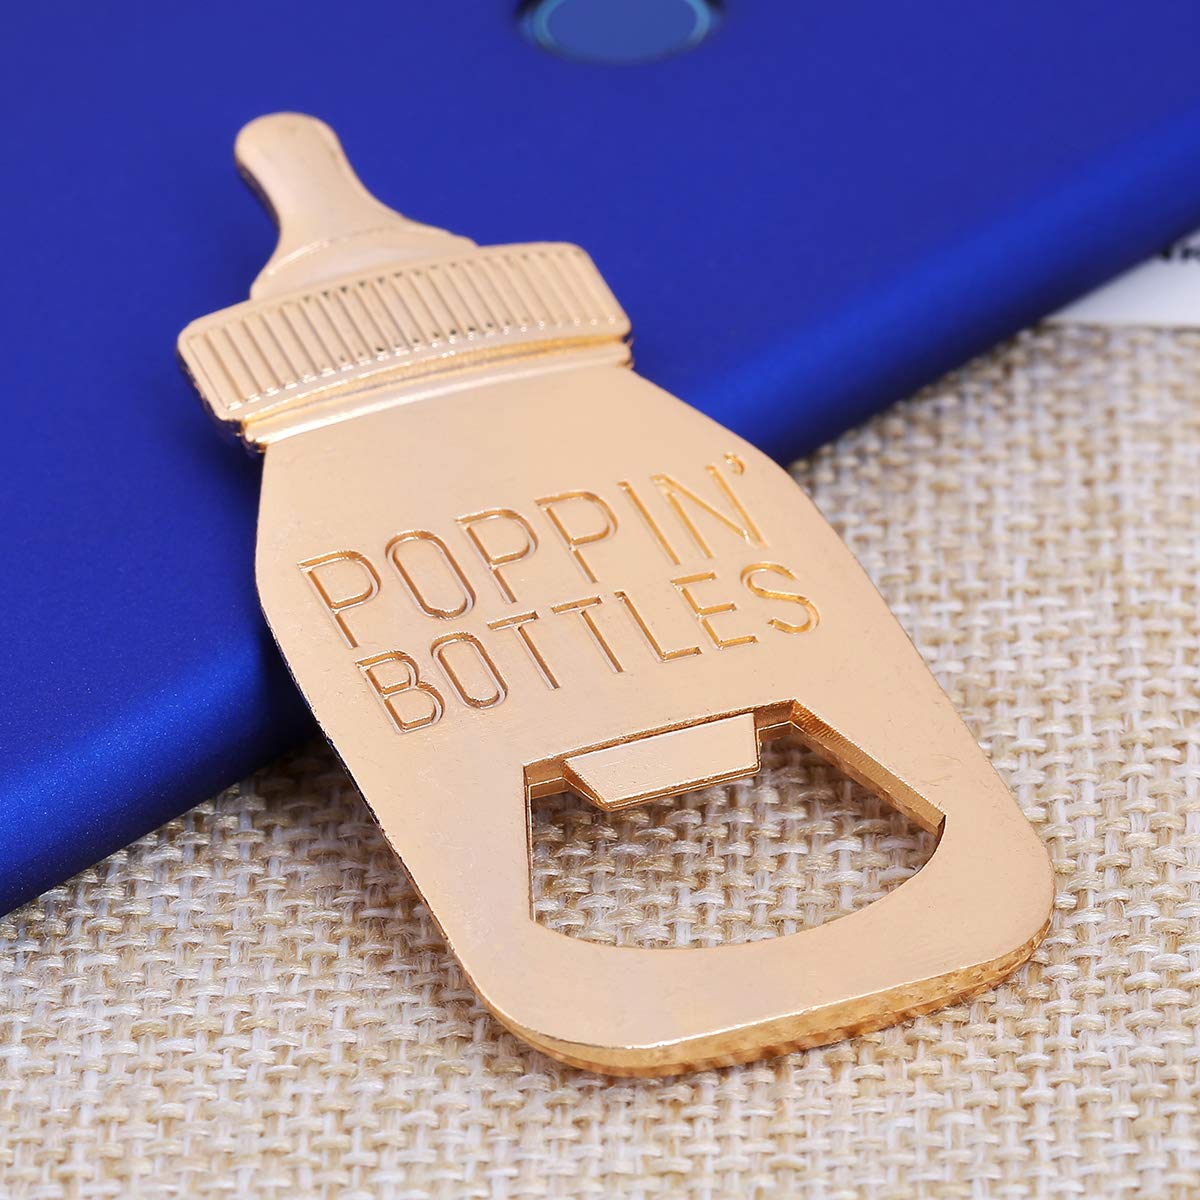 24 pcs Baby Shower Return Gifts for Guest Supplies Poppin Baby Bottle Shaped Bottle Opener Wedding Favor with Exquisite Packaging Party Souvenirs Gift Decorations by WeddParty (Blue 24pcs)